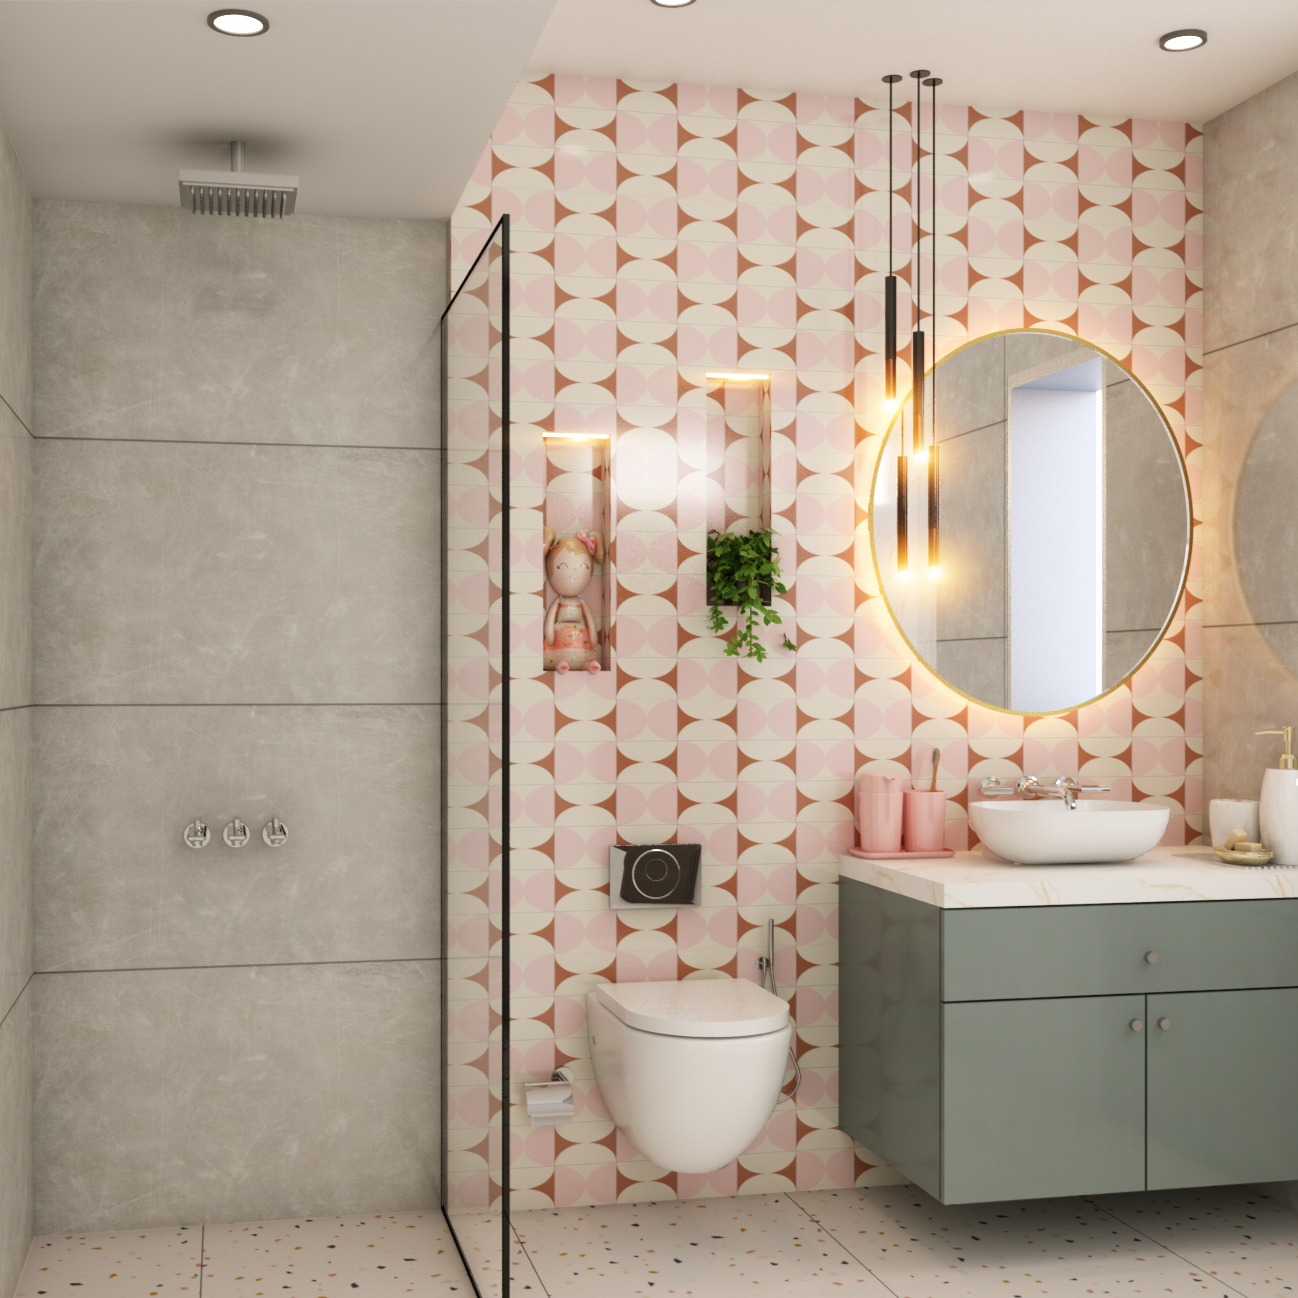 Modern Bathroom Design With Pink Patterned Wall